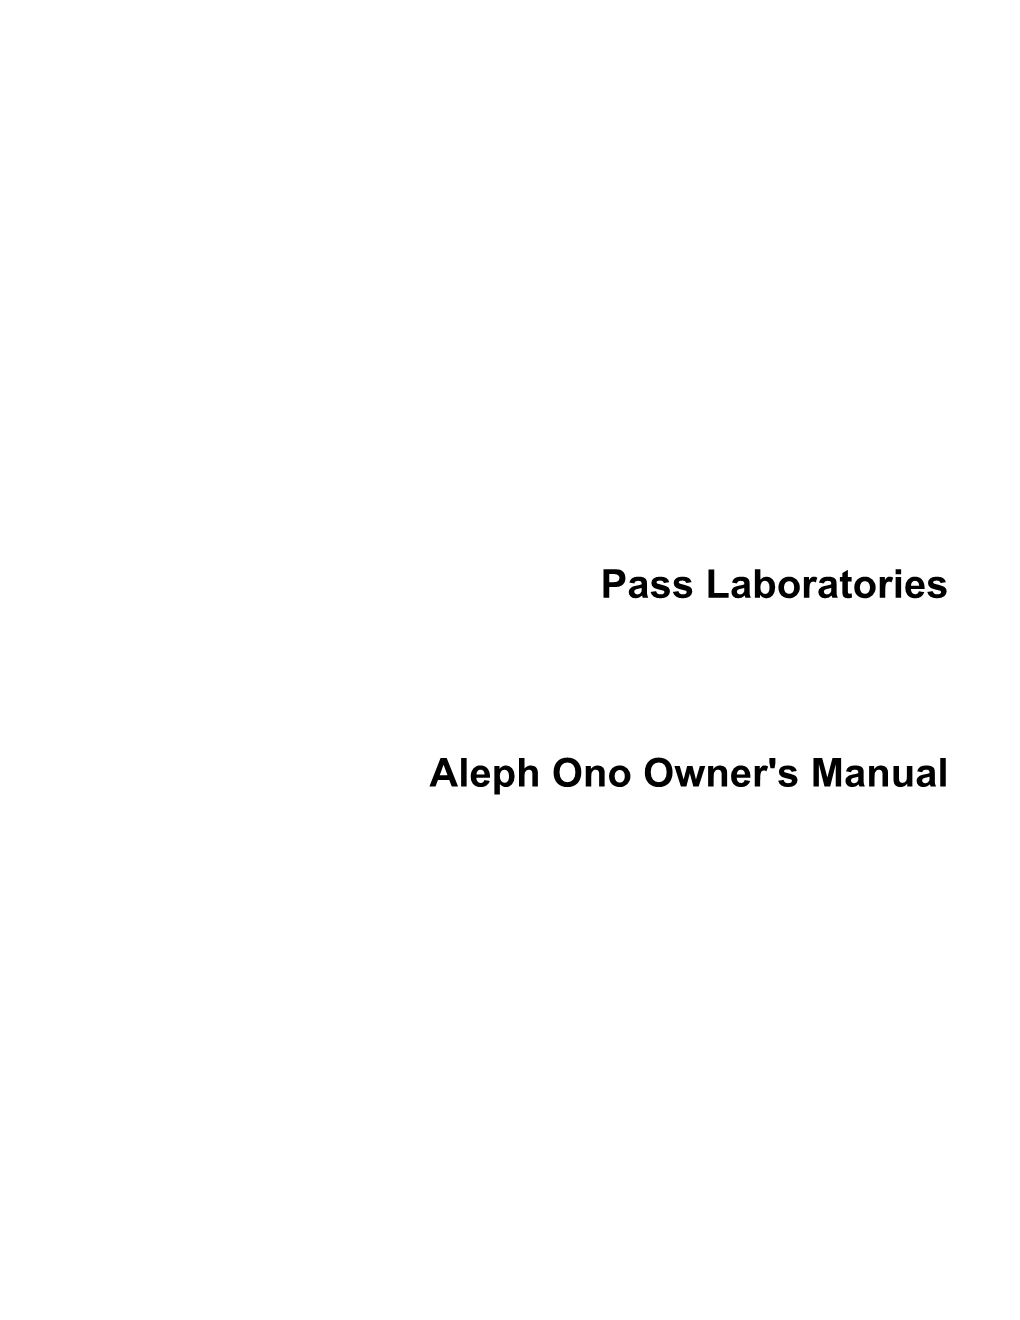 Pass Laboratories Aleph Ono Owner's Manual